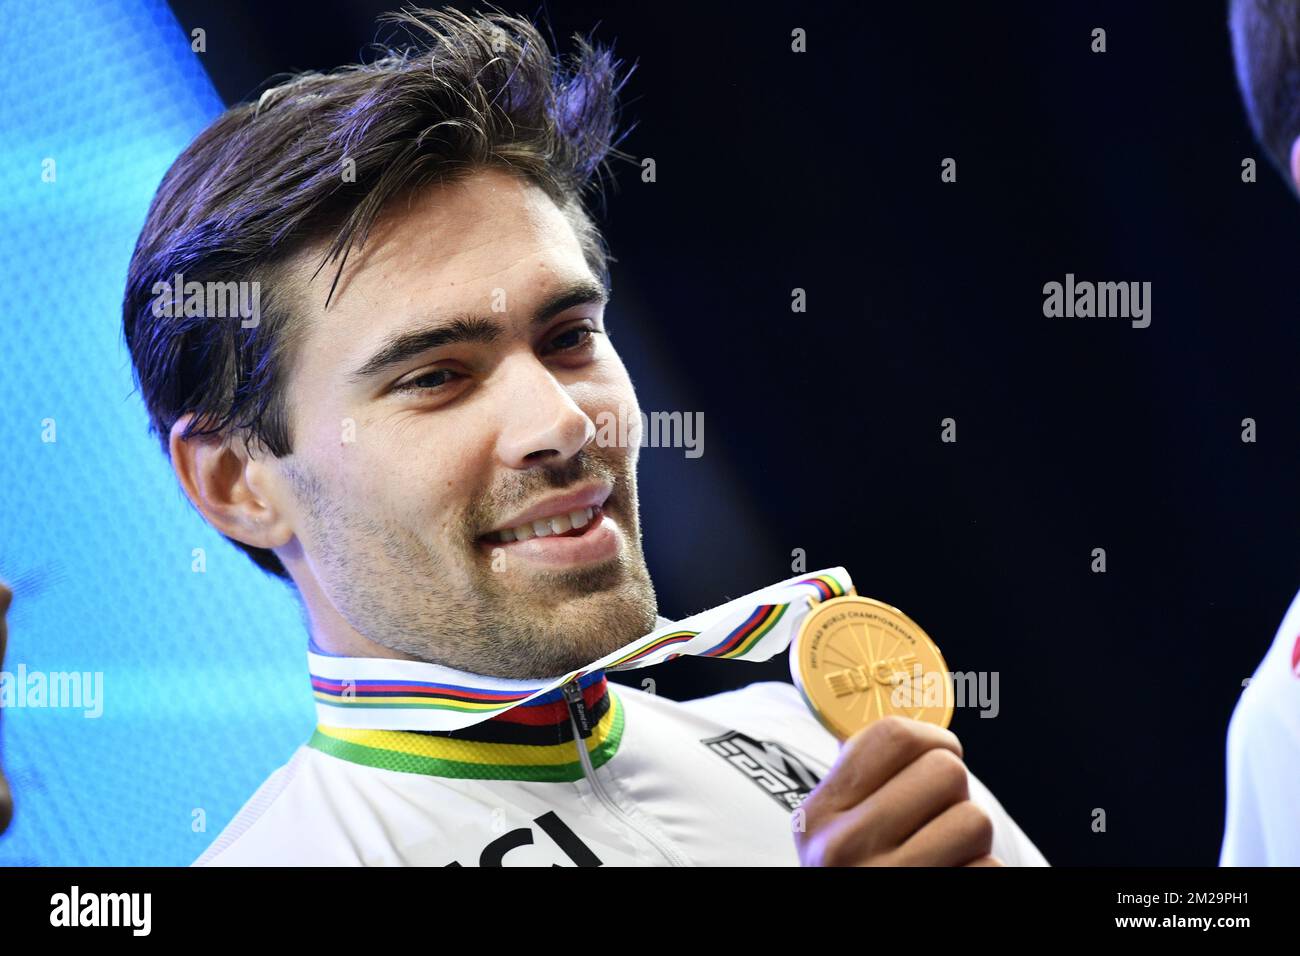 Dutch Tom Dumoulin celebrates on the podium with his gold medal after winning the Men Elite individual time trial race at the 2017 UCI Road World Cycling Championships in Bergen, Norway, Wednesday 20 September 2017. BELGA PHOTO YORICK JANSENS Stock Photo